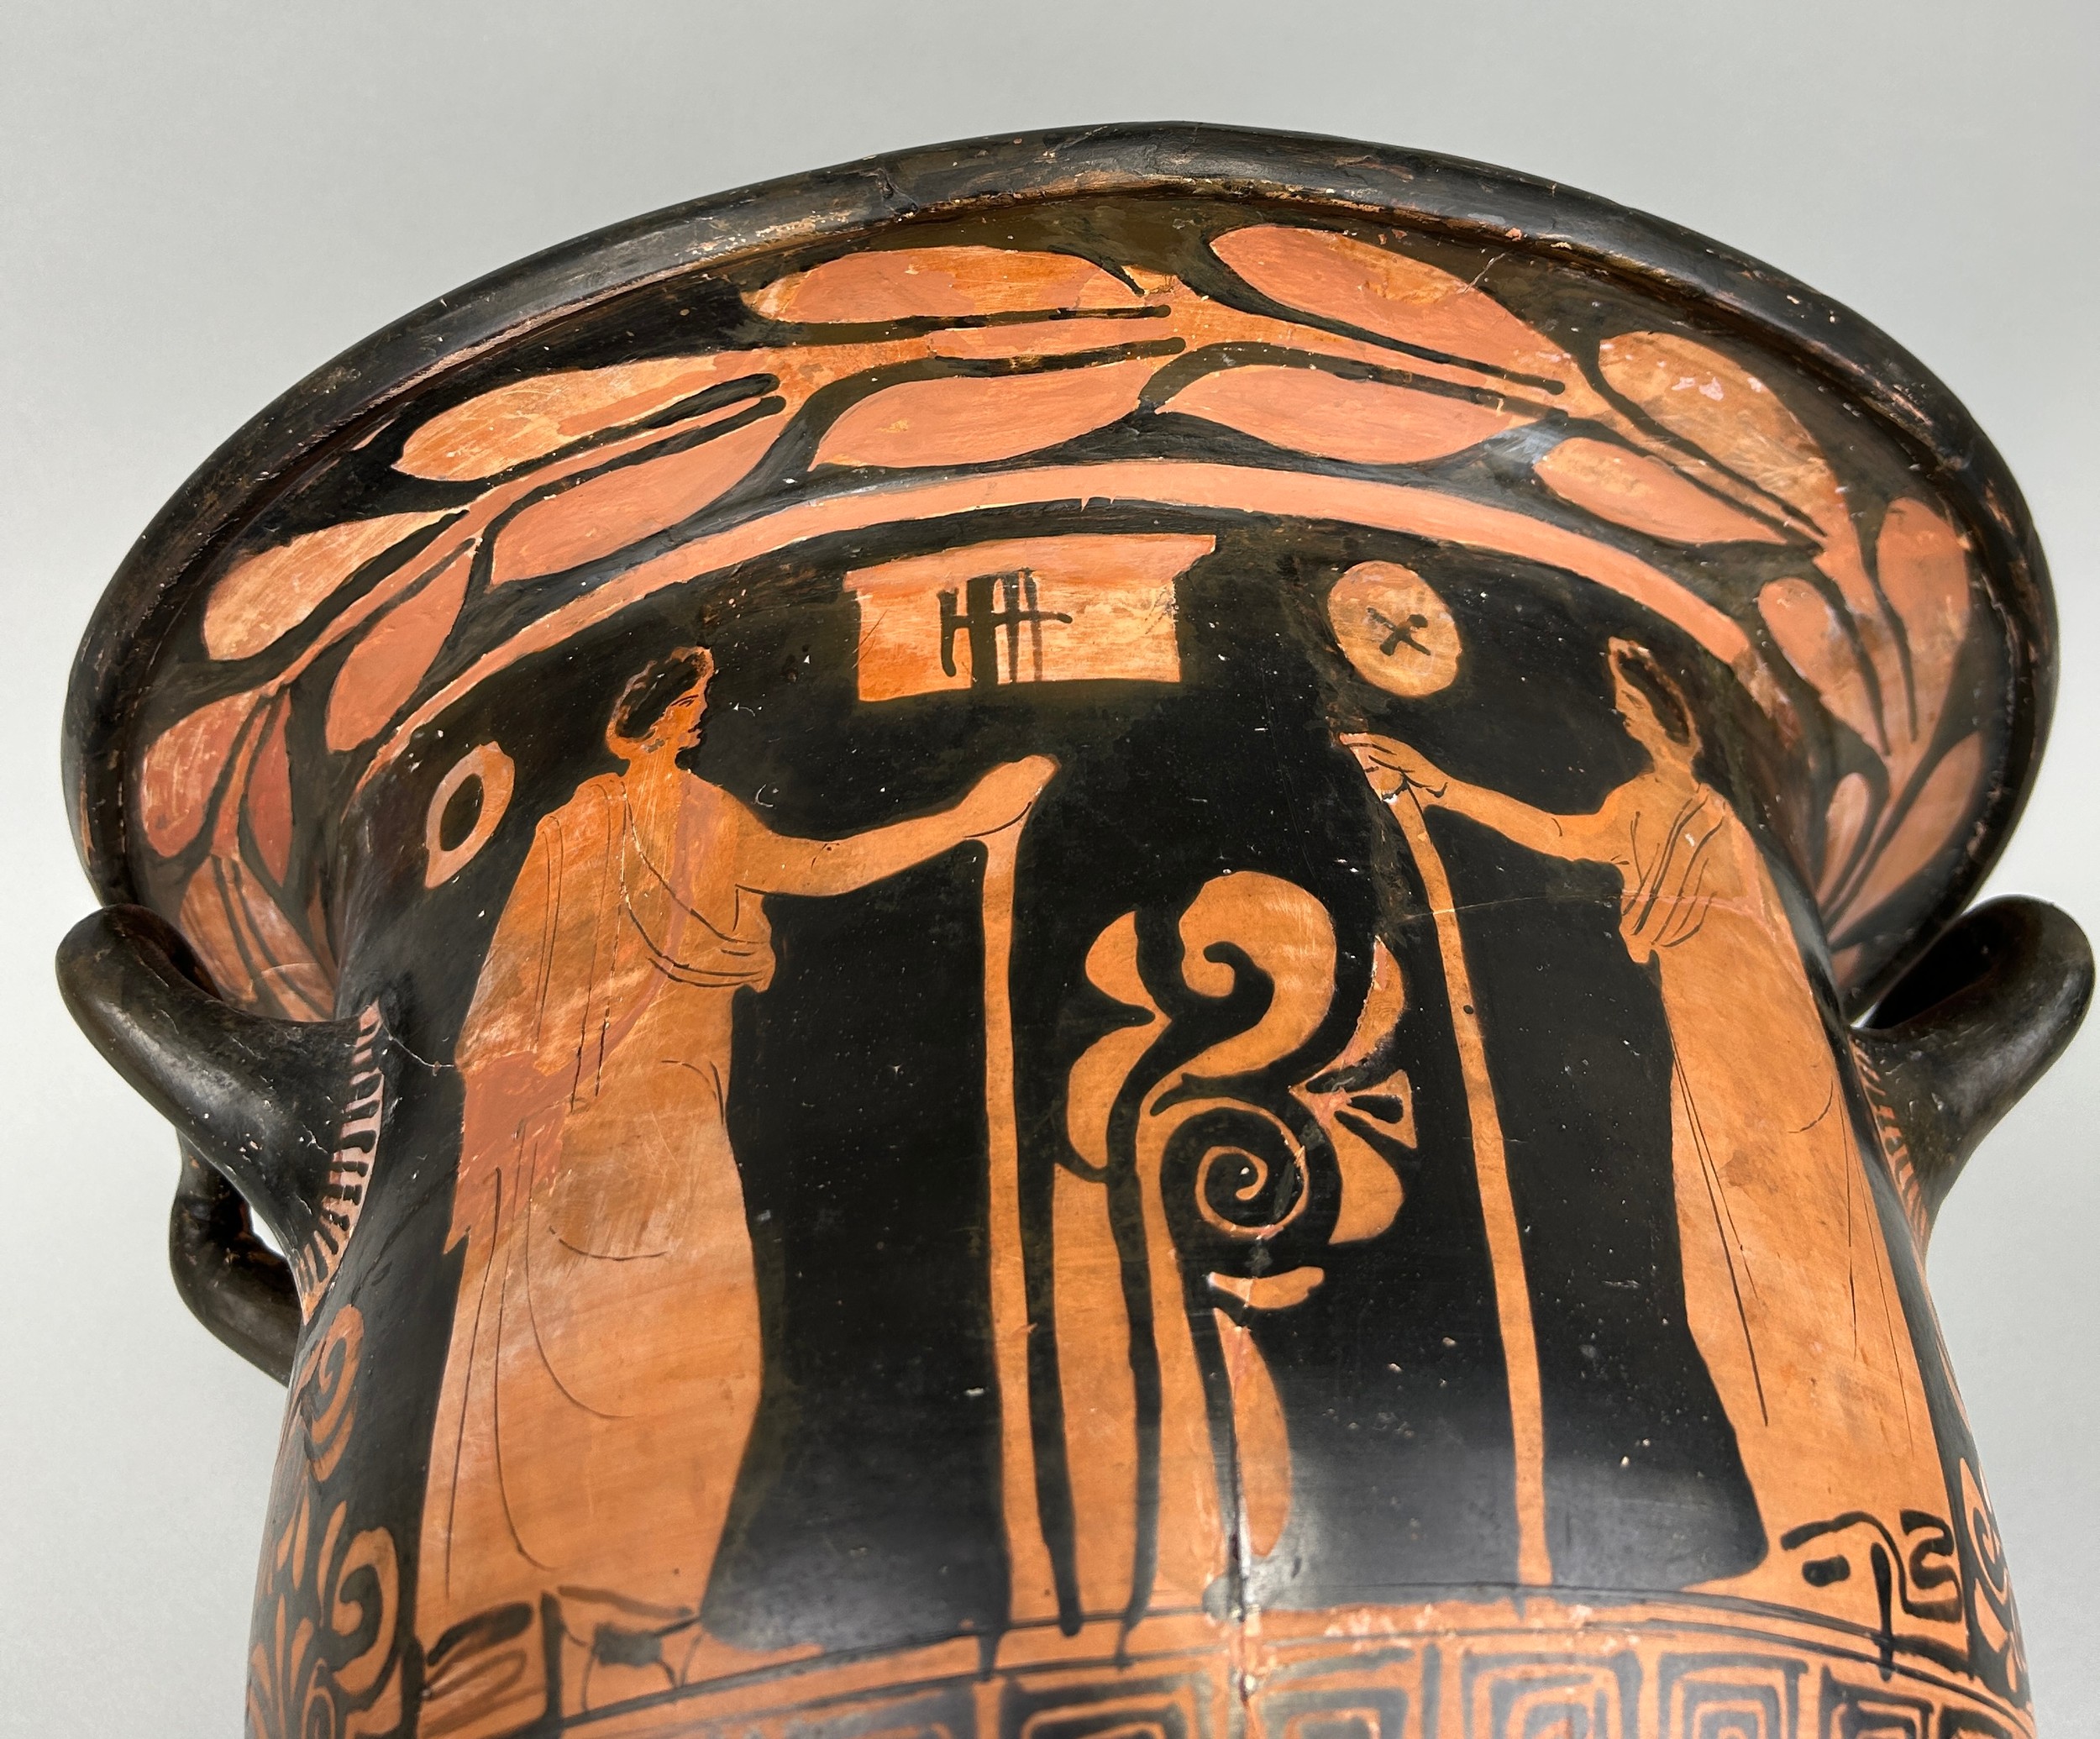 AN APULIAN POTTERY BELL KRATER ATTRIBUTED TO THE BARLETTA PAINTER CIRCA 4TH CENTURY BC, 37.8cm H x - Image 11 of 12